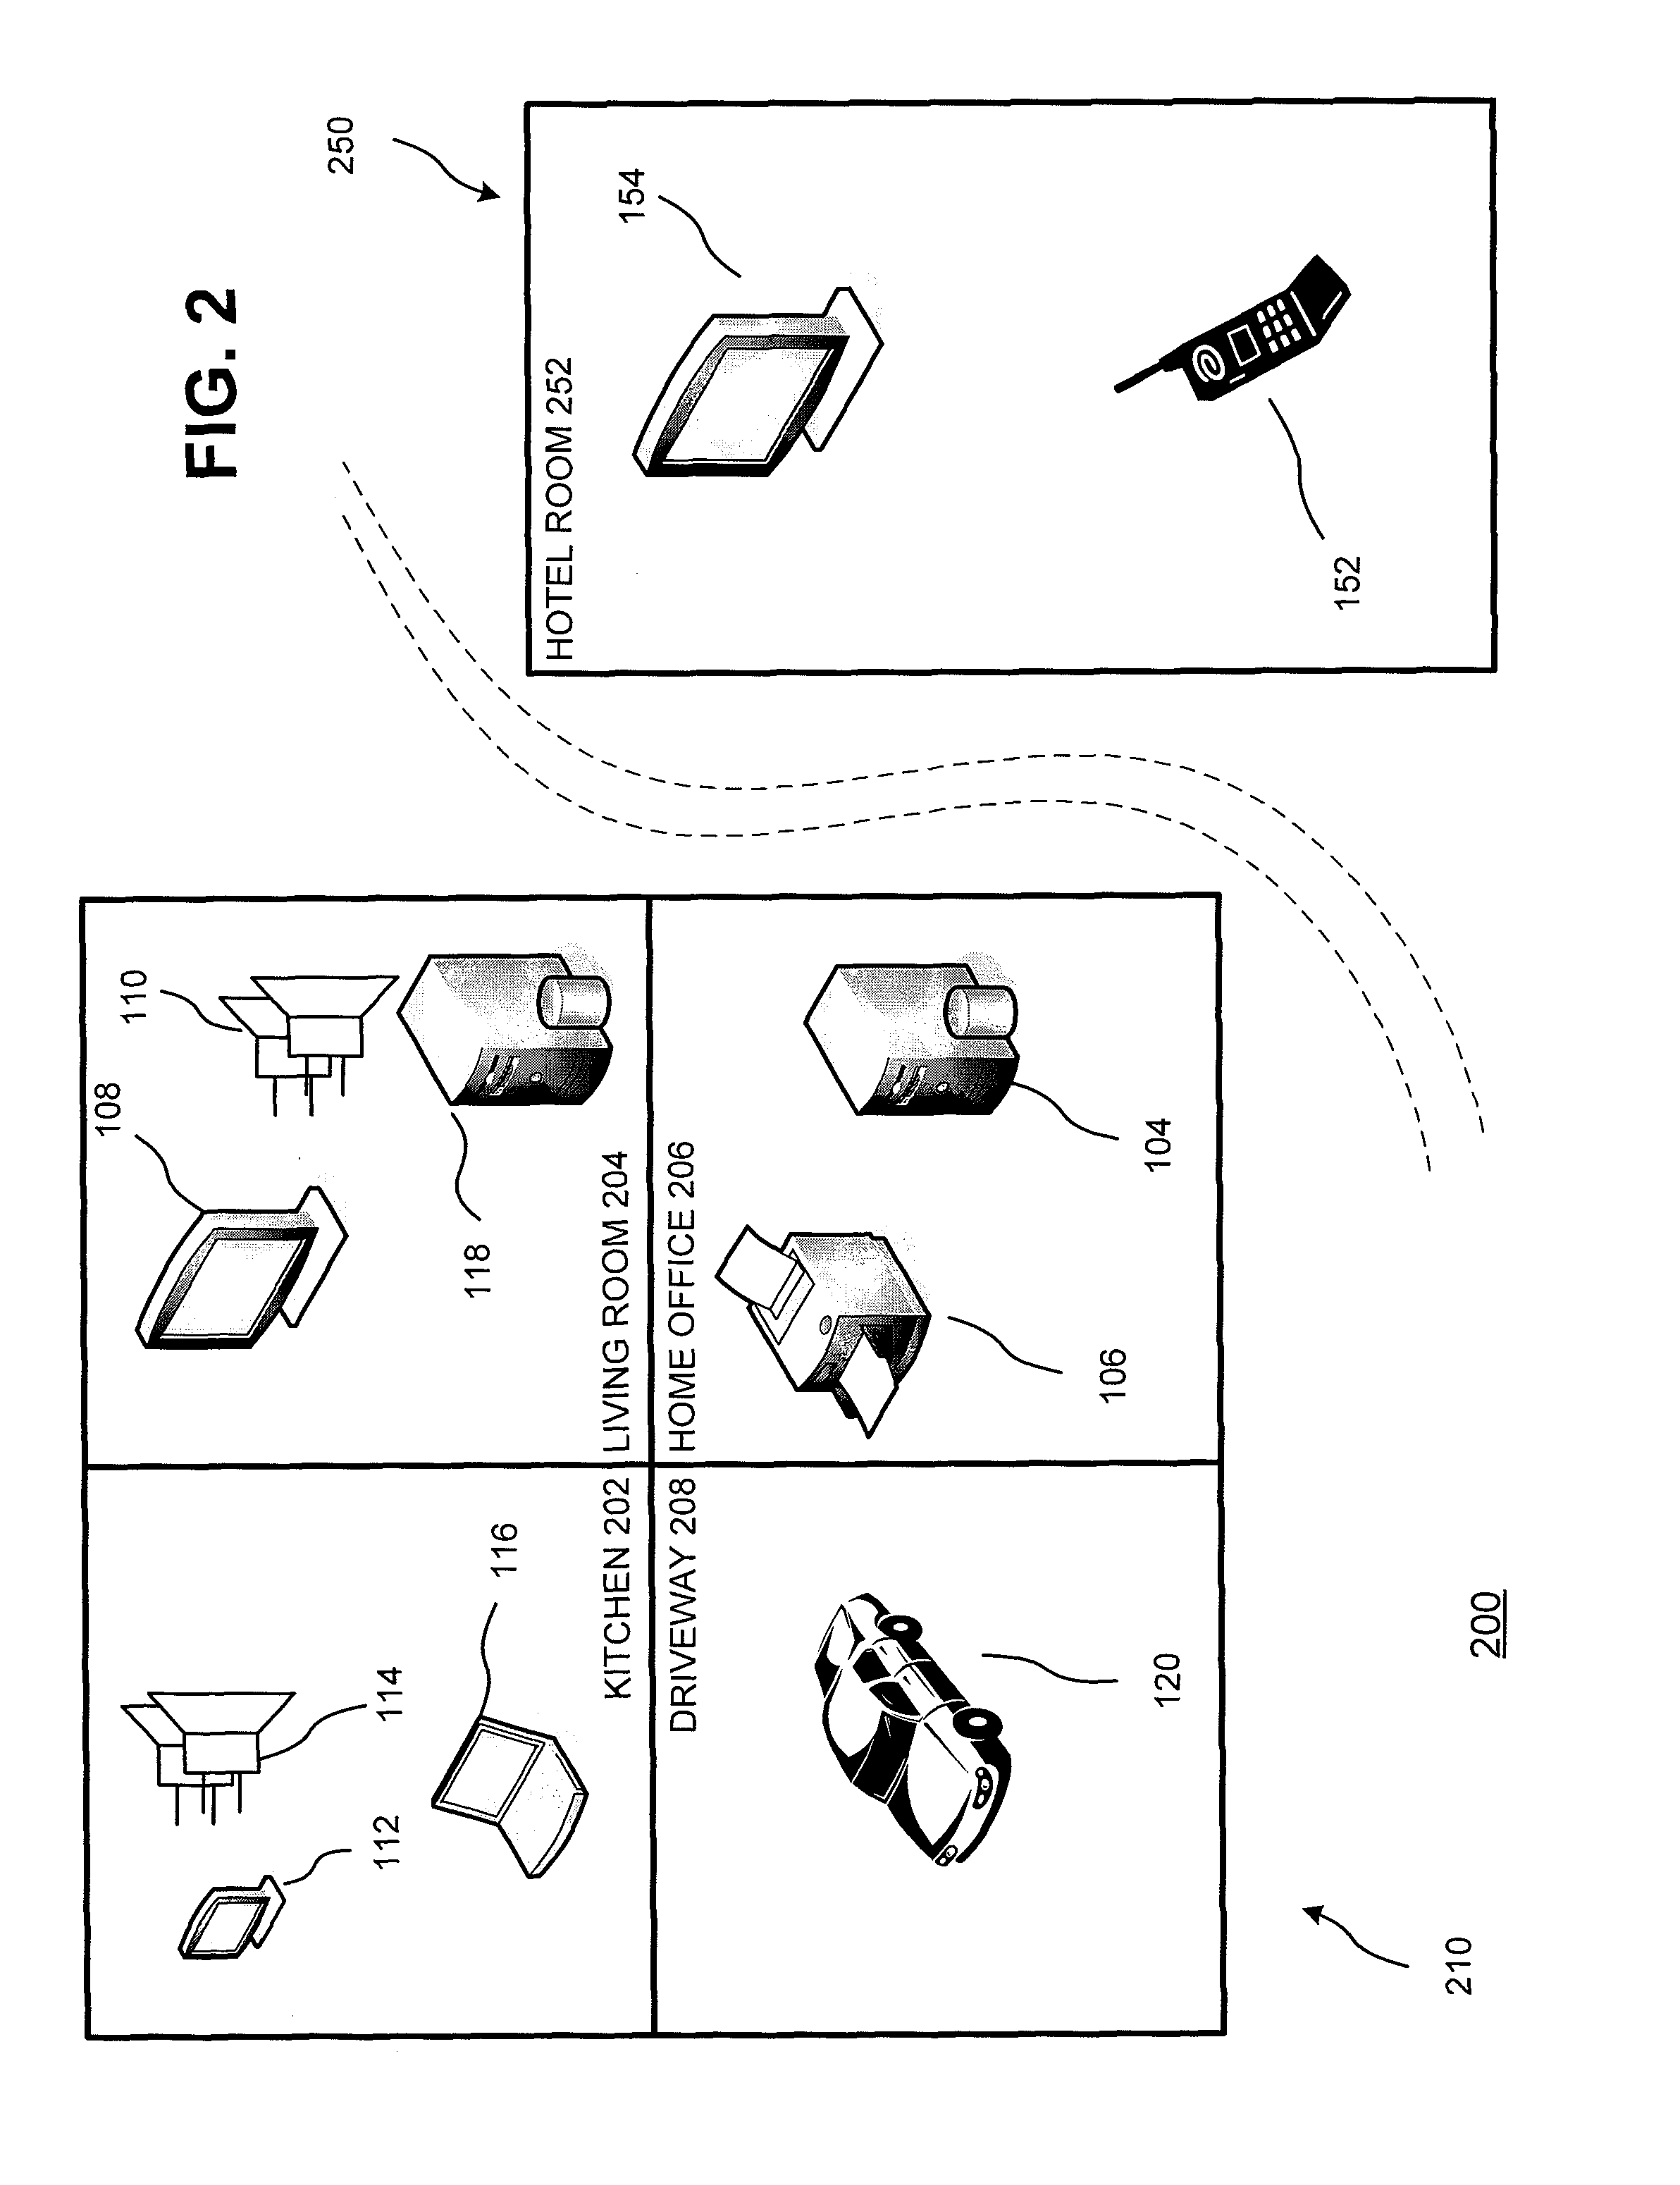 Providing services to a guest device in a personal network